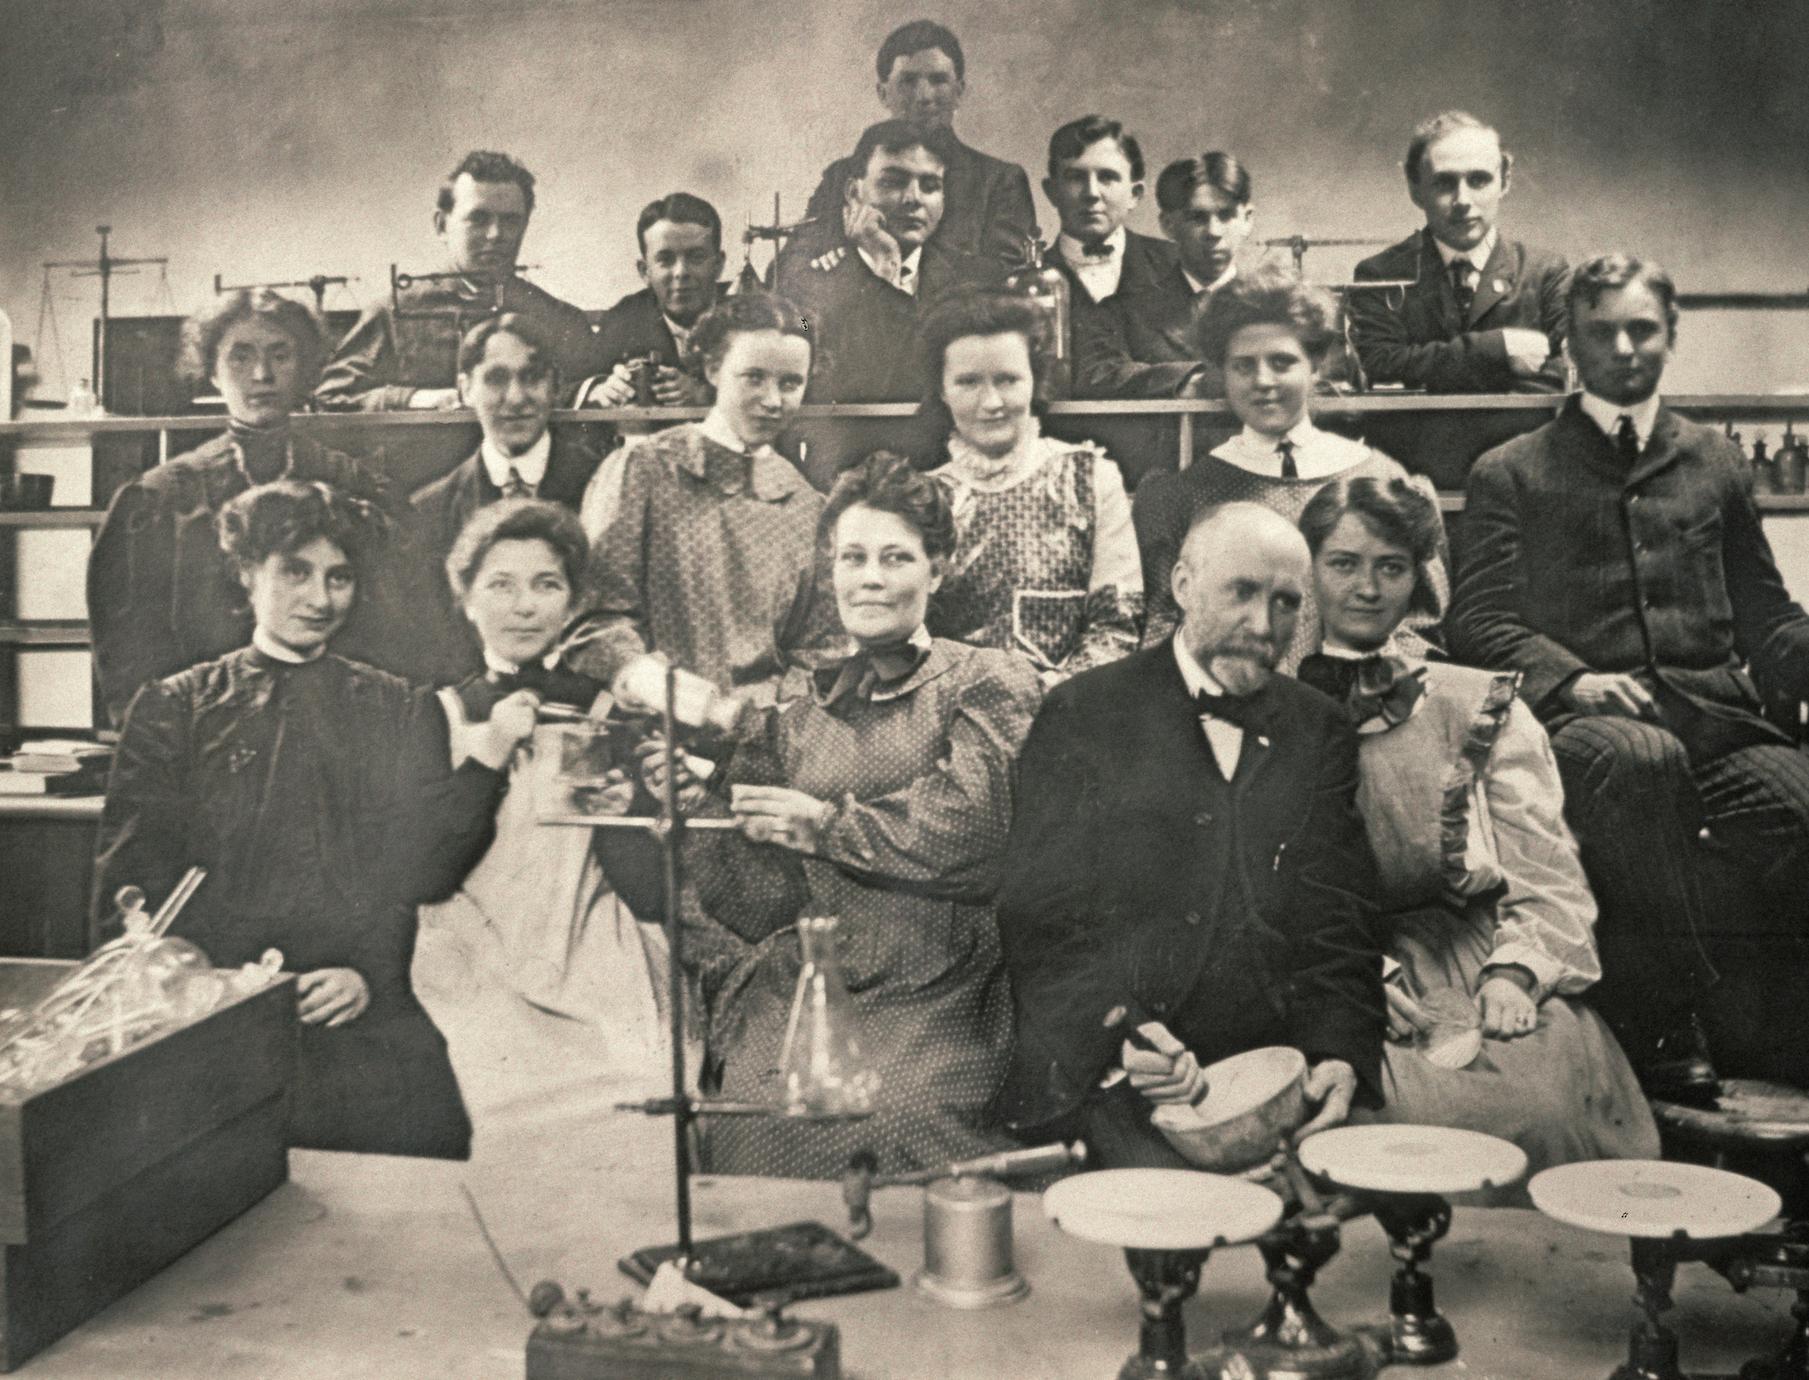 Arthur Upham (holding mortar and pestle) with science class